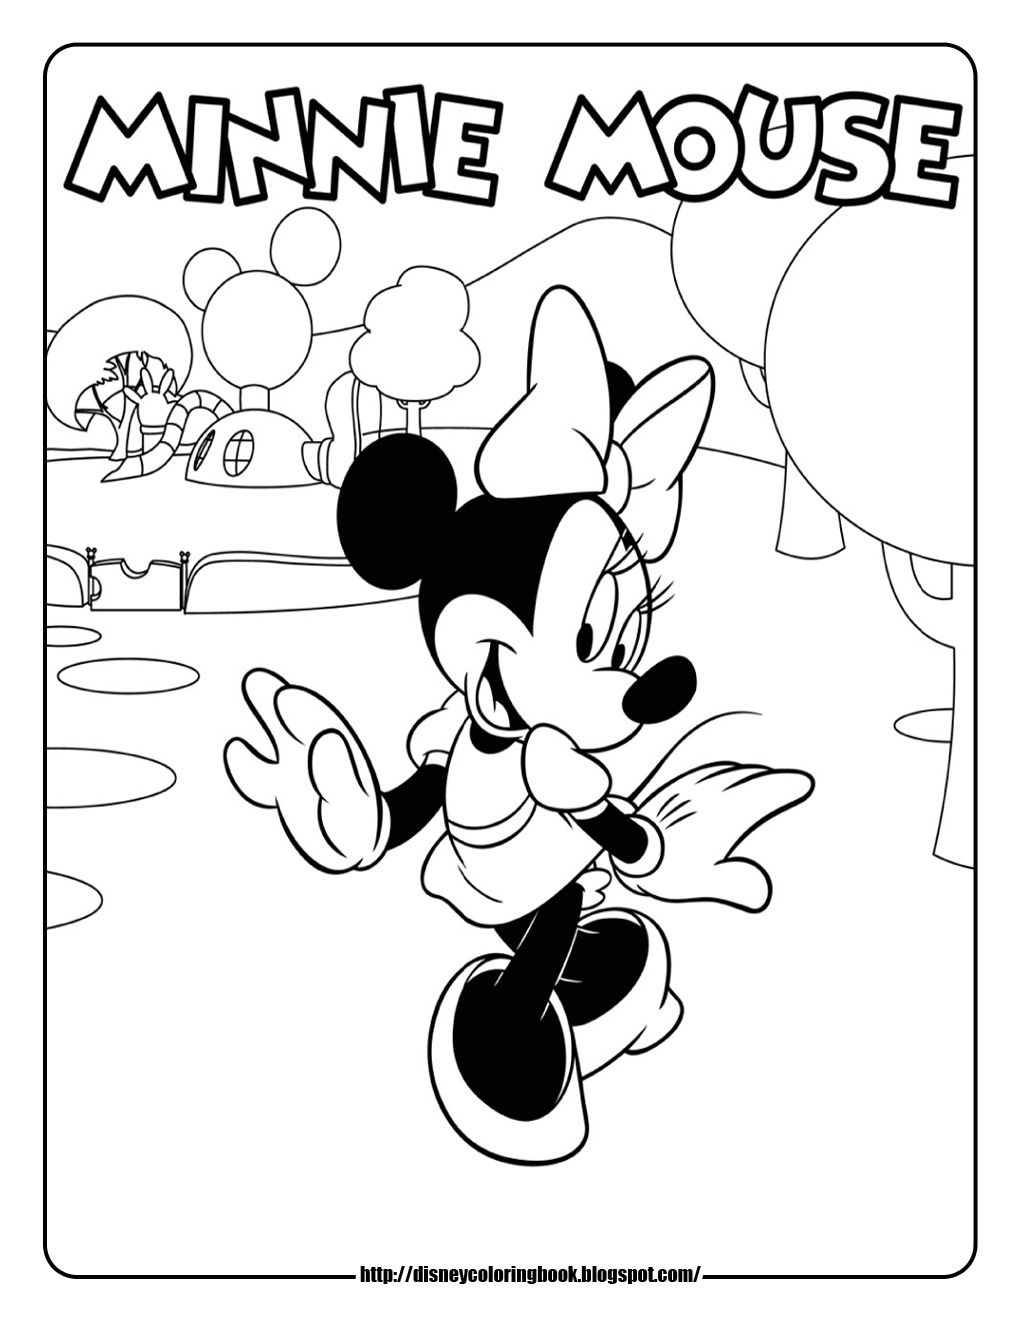 Mikey mouse clubhouse coloring pages minnie mouse coloring pages mickey mouse coâ mickey mouse coloring pages disney coloring pages free disney coloring pages